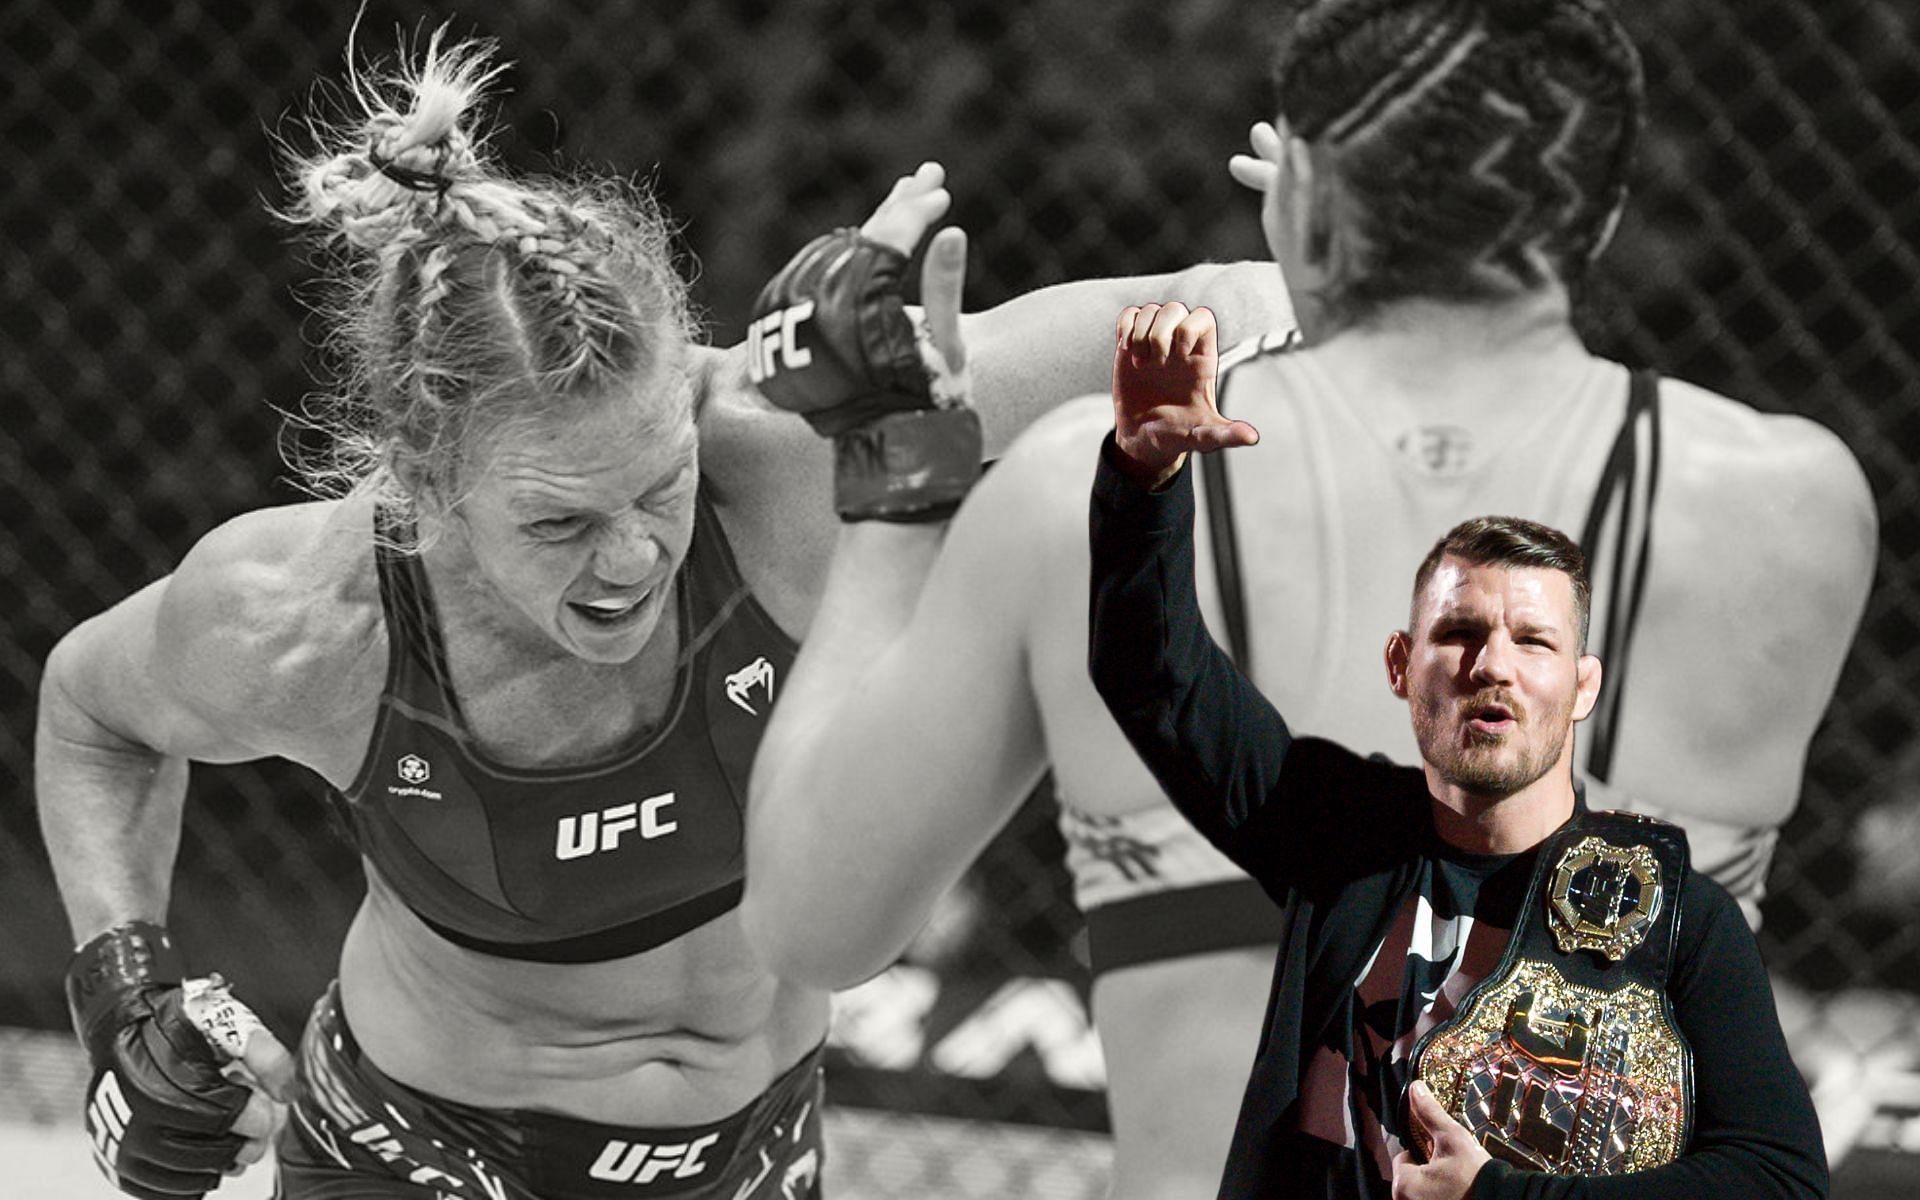 Holly Holm (left), Ketlen Vieira (center) and Michael Bisping (right) (Images via Twitter/@ESPNMMA and Getty)